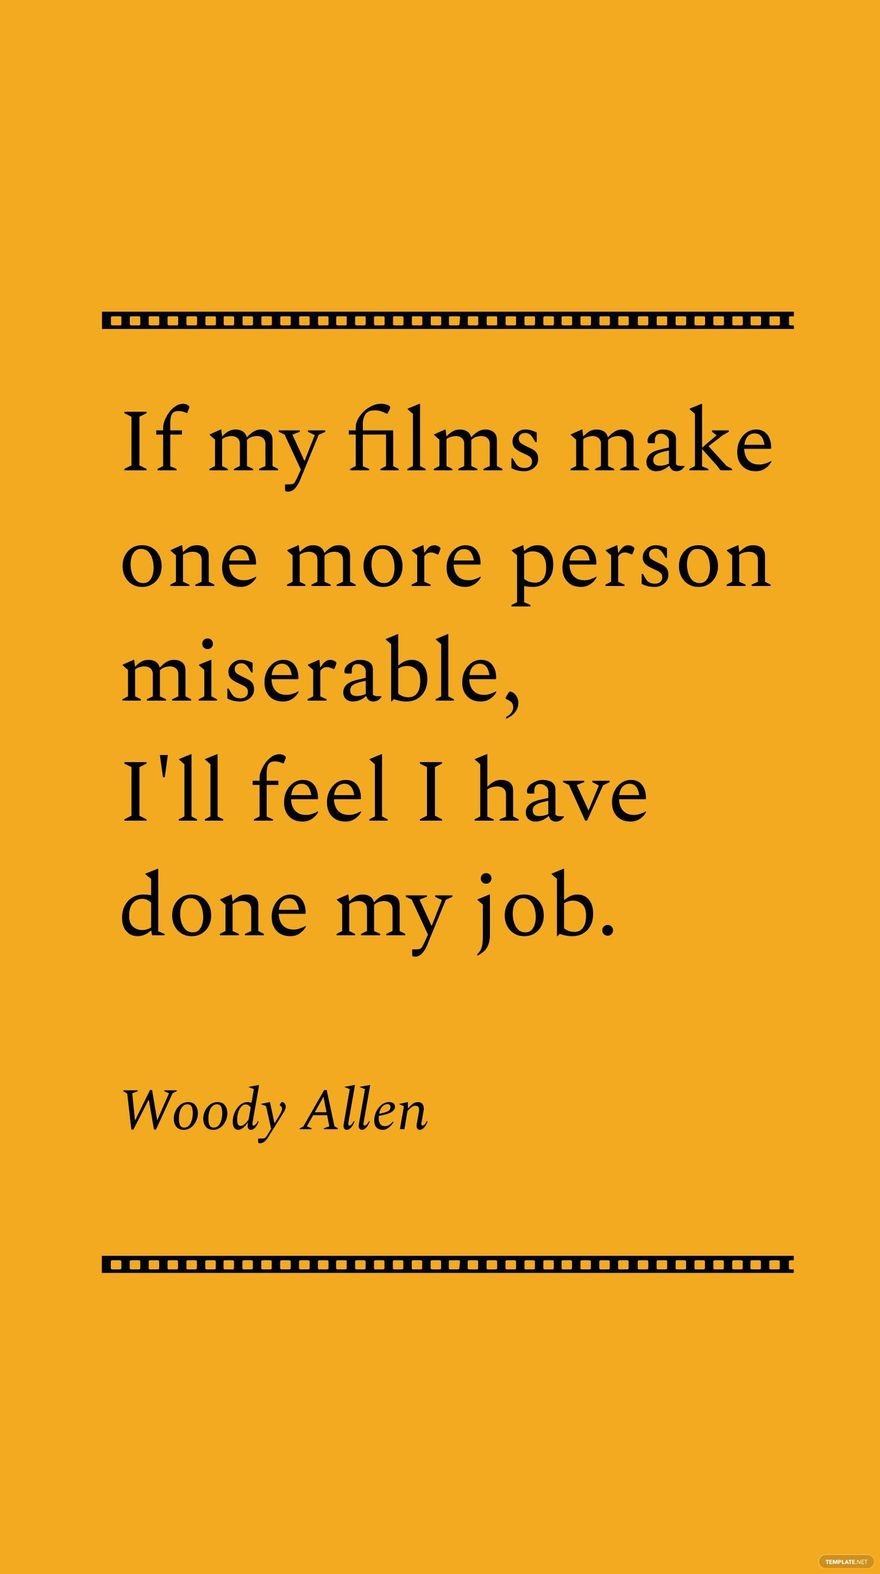 Woody Allen - If my films make one more person miserable, I'll feel I have done my job.